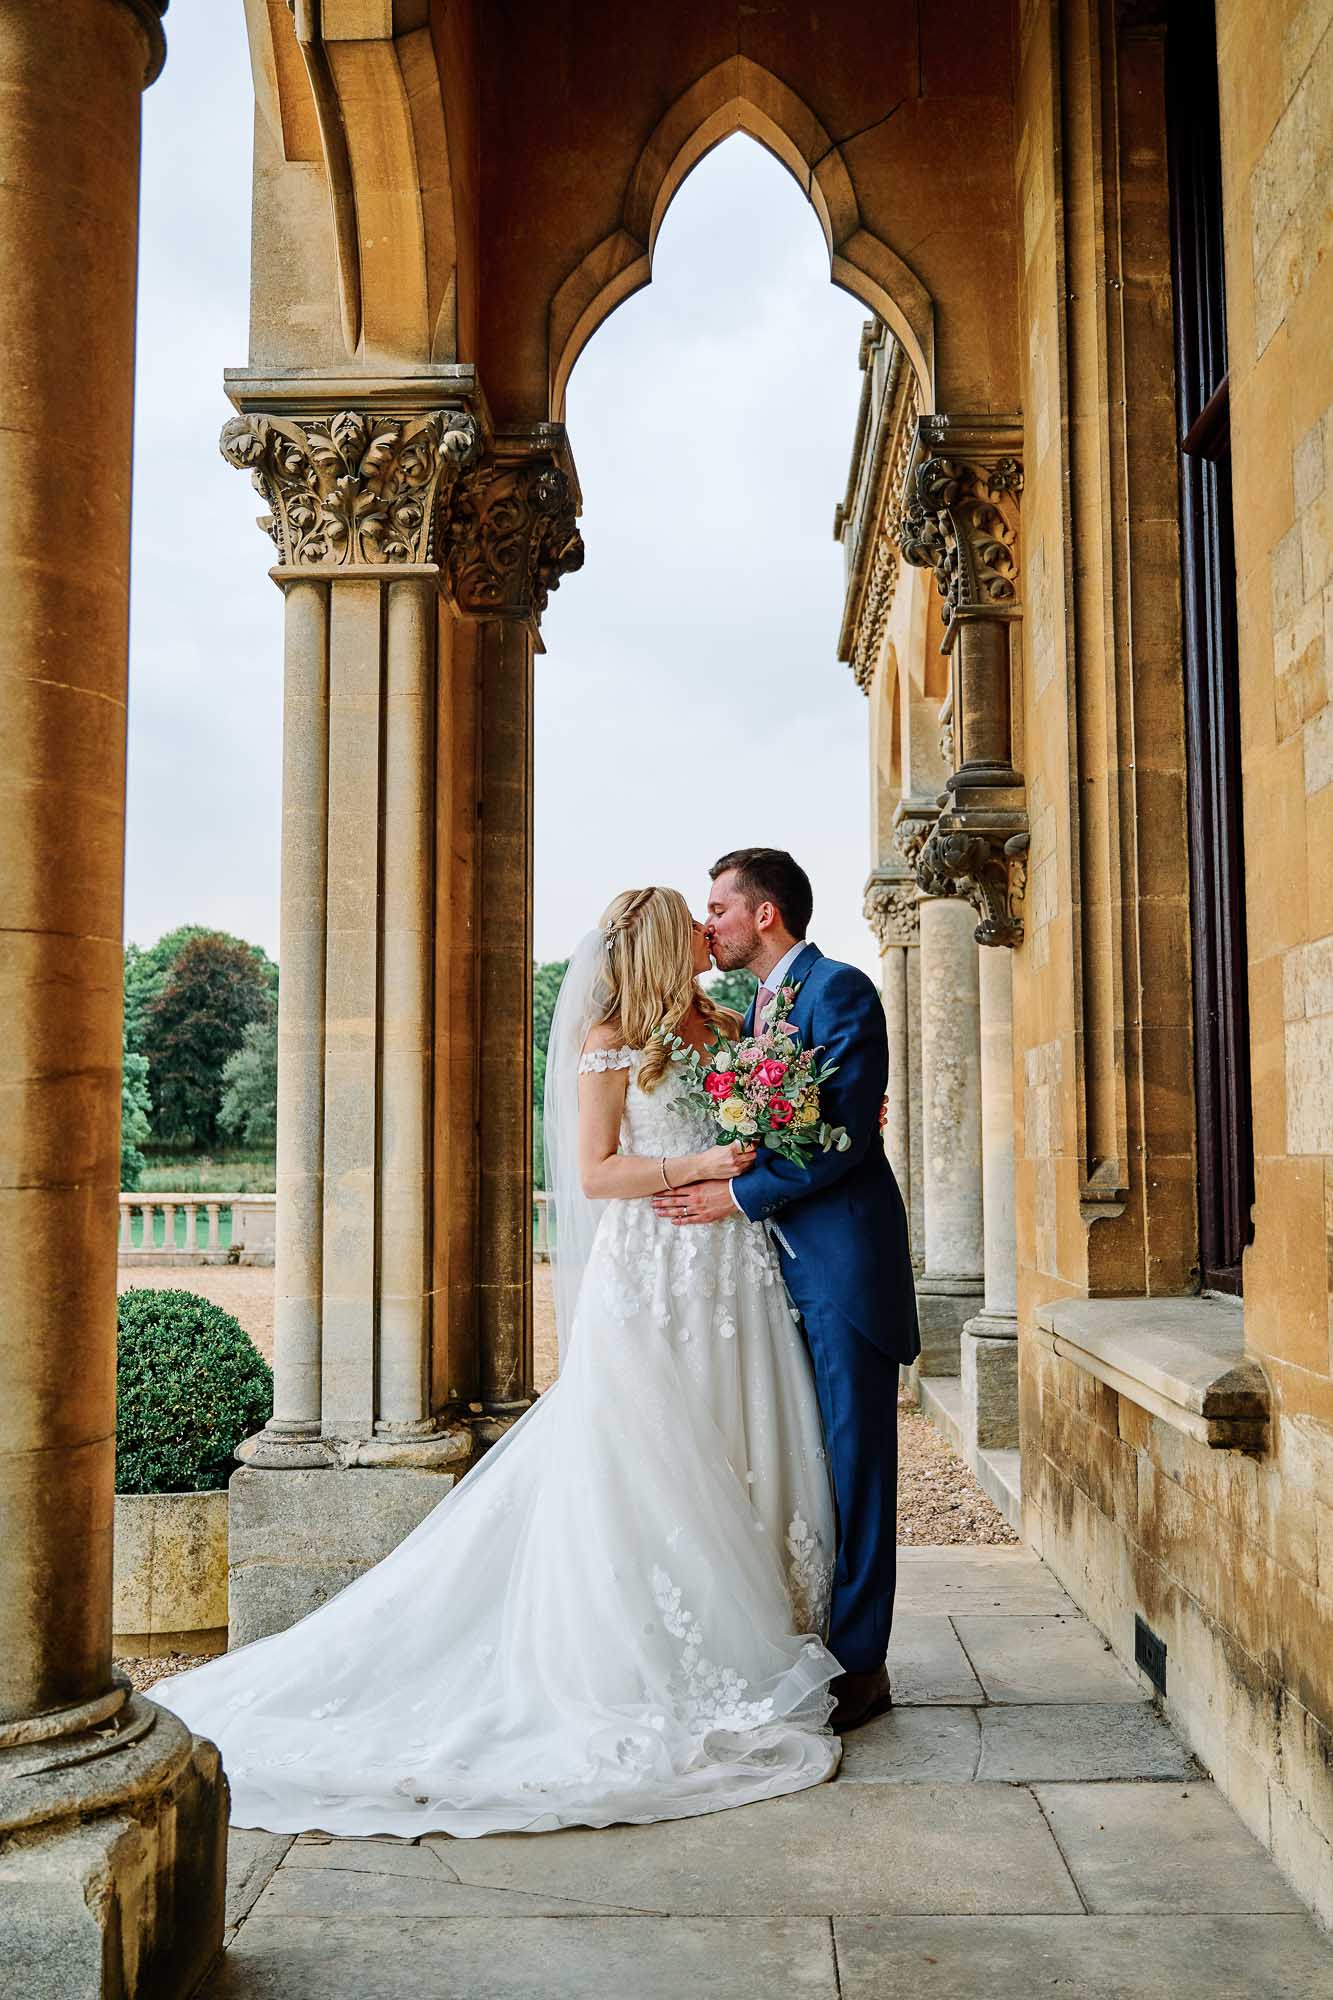 Best Recommended Wedding Photographer Walton Hall Stratford-upon-Avon Chris Fossey Photography WS